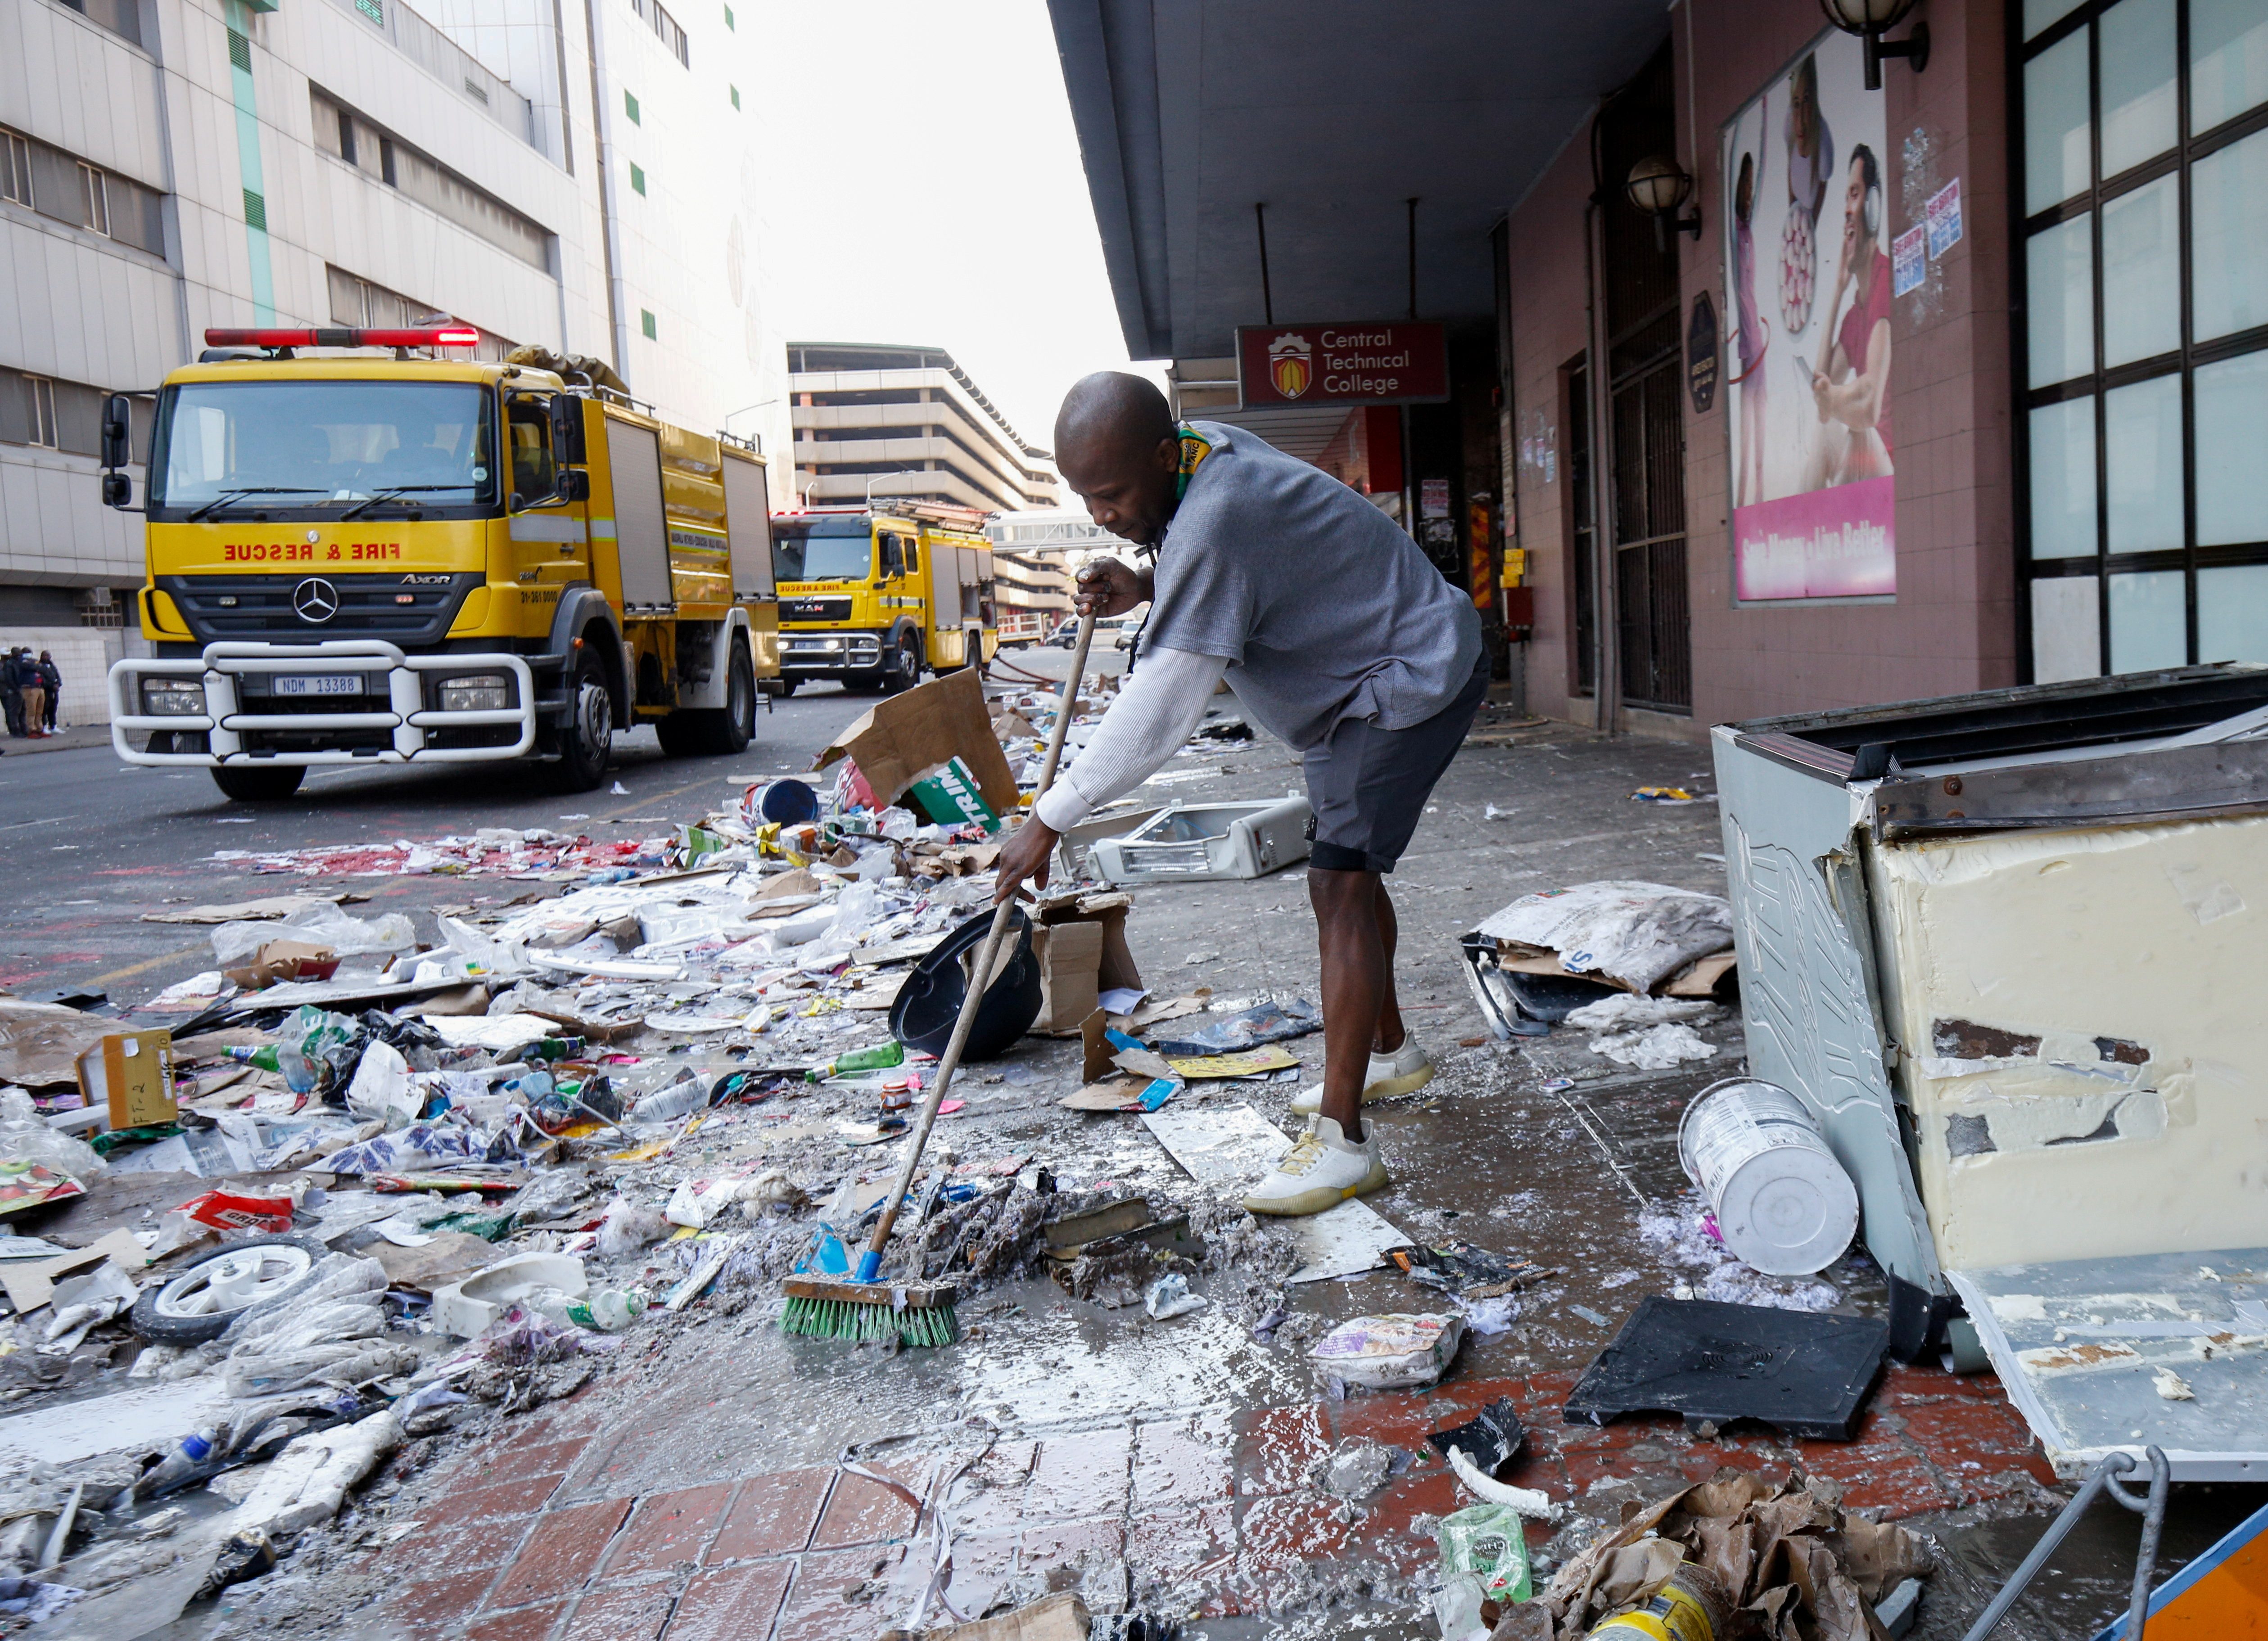 South African leader says calm has been restored to most places after riots